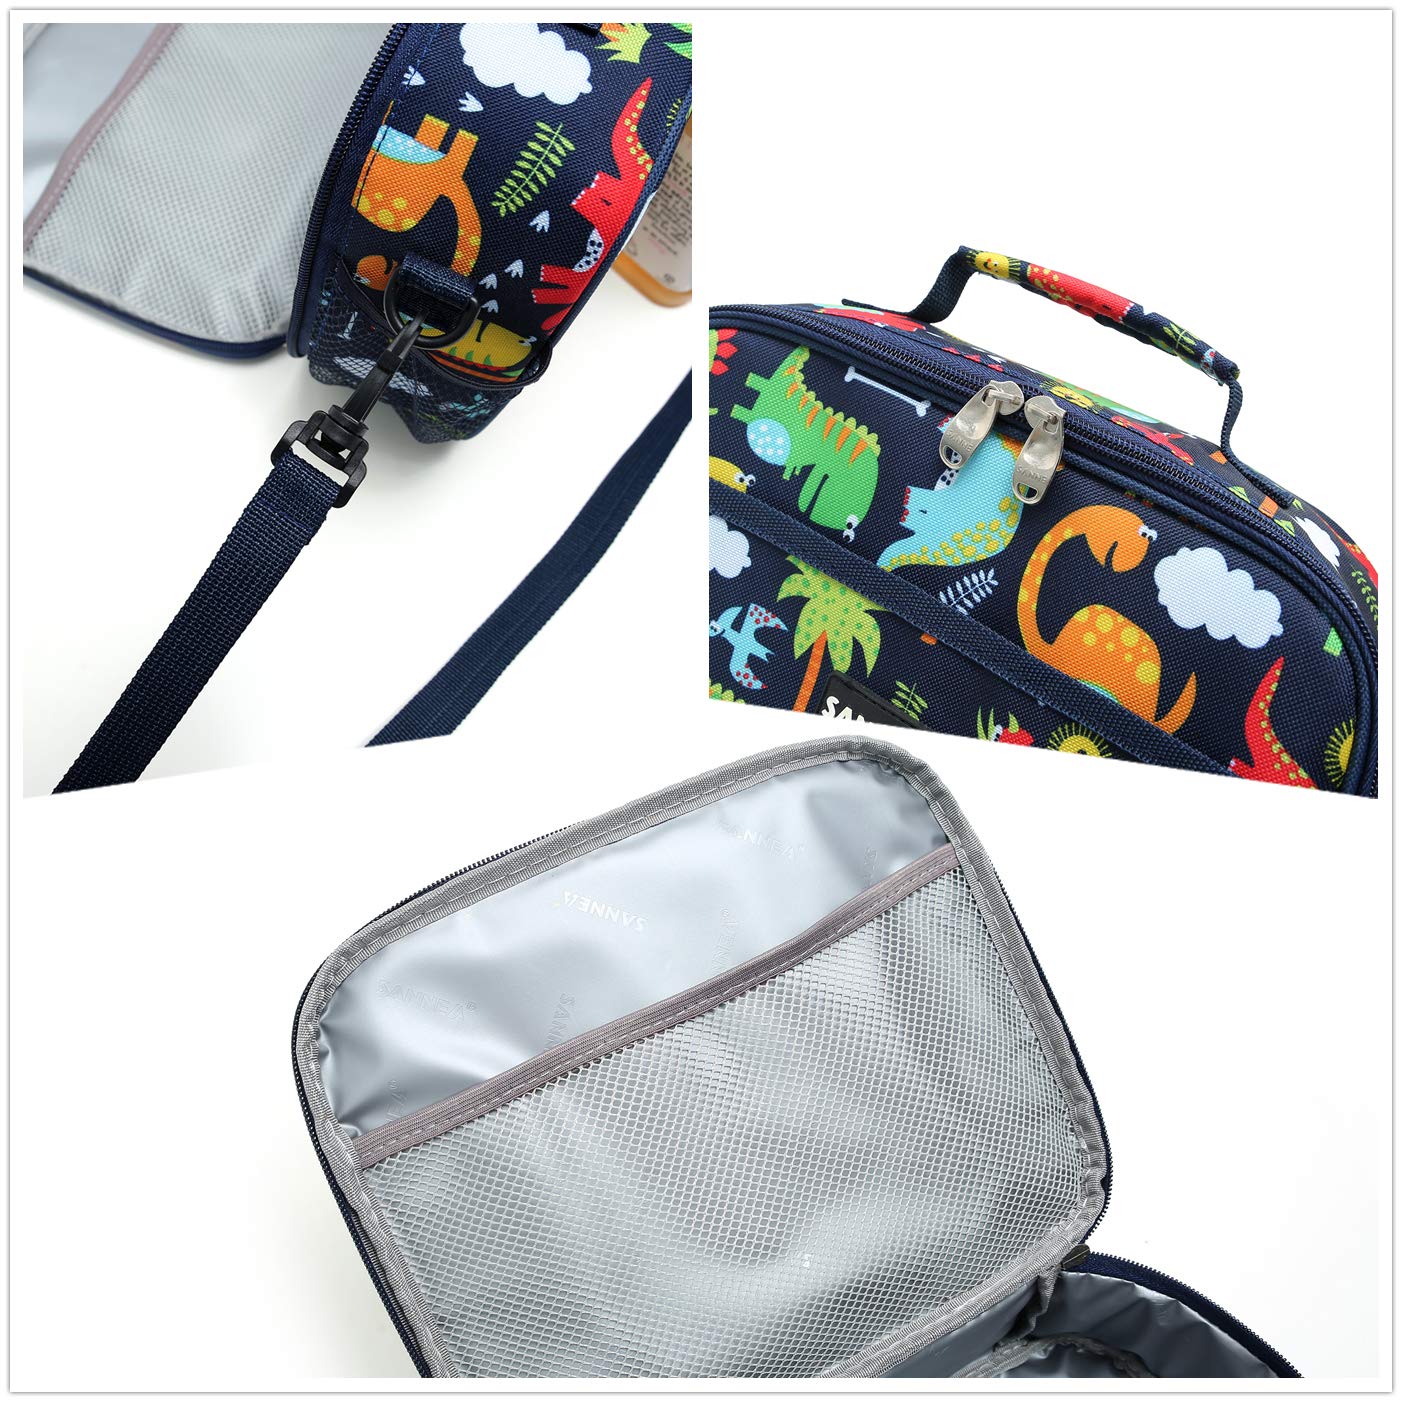 Lunch Bag for Kids, Thermal Lunch Box Kids Boys Girls, Dinosaur Lunch Box Cooler Bag Portable Lunch Organizer for School Picnic Work Hiking Beach